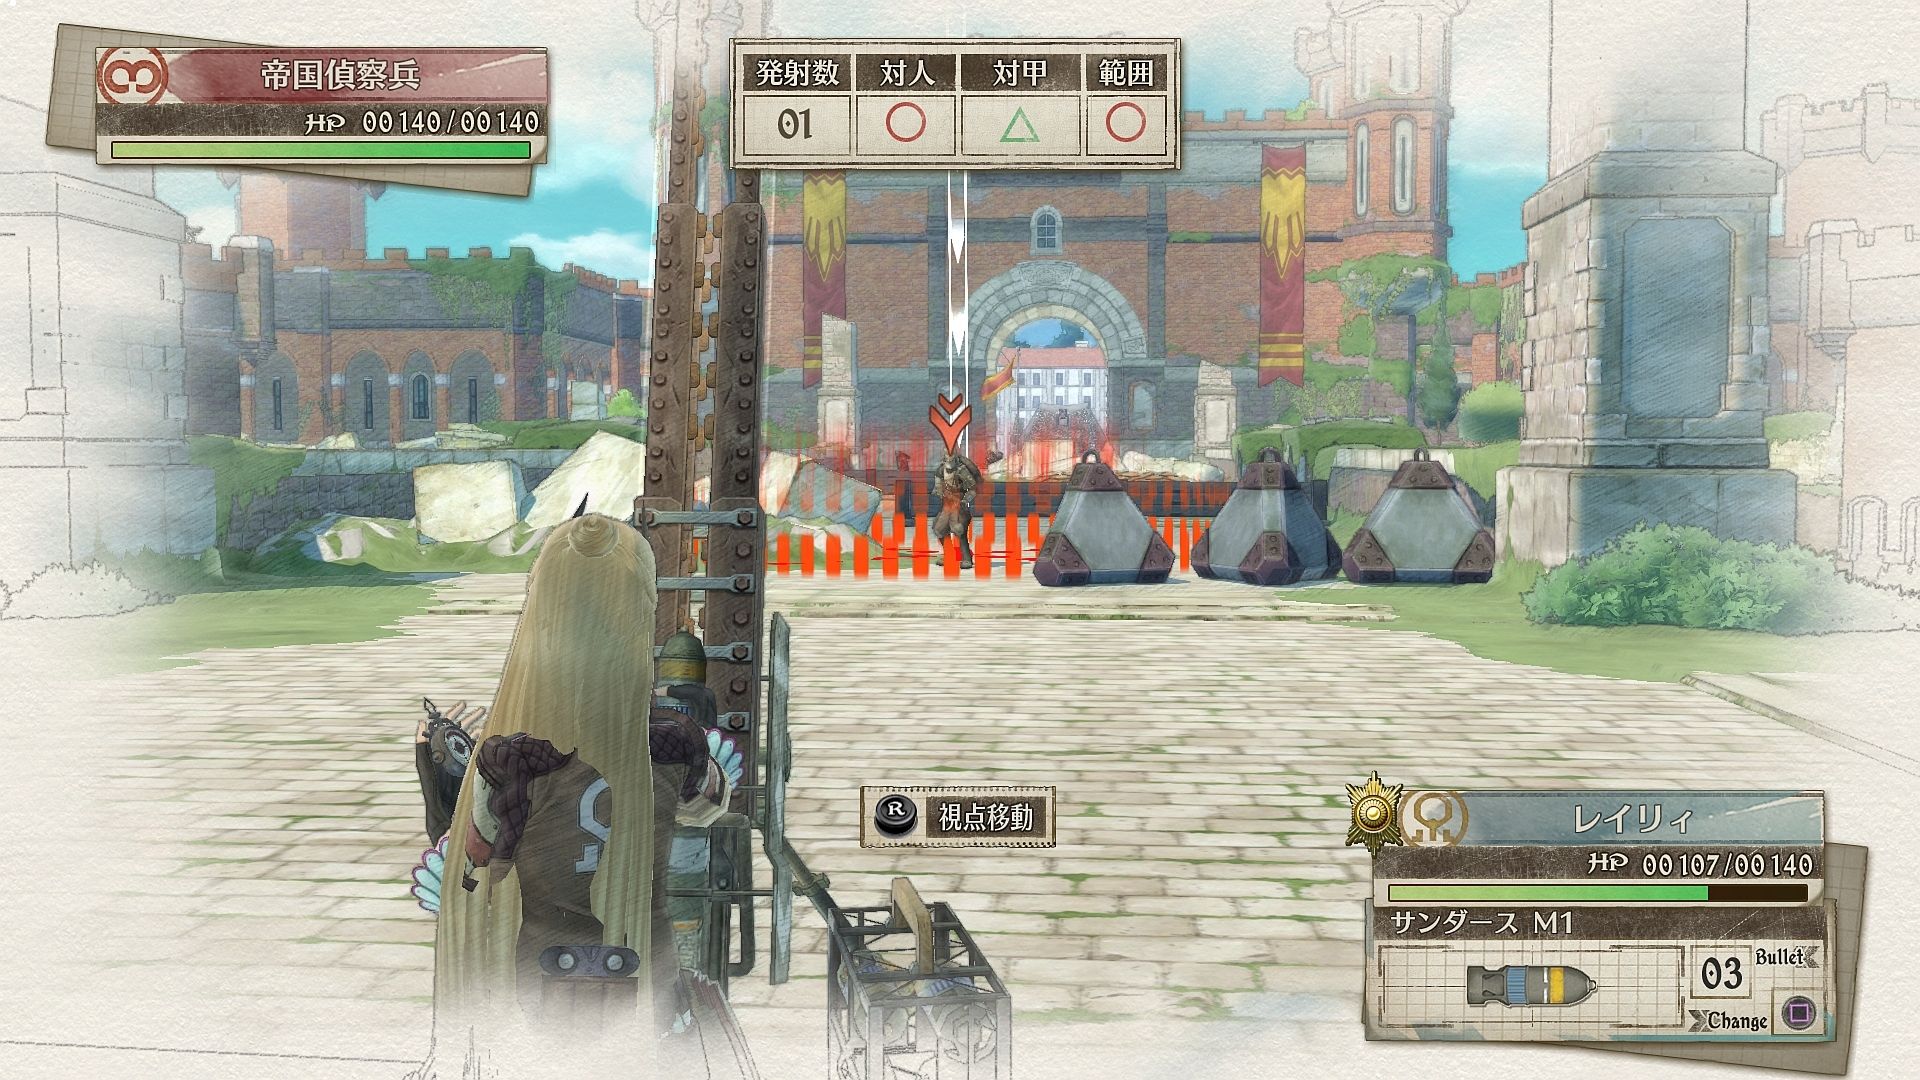 http://www.perfectly-nintendo.com/wp-content/gallery/valkyria-chronicles-4-27-12-2017/43.jpg